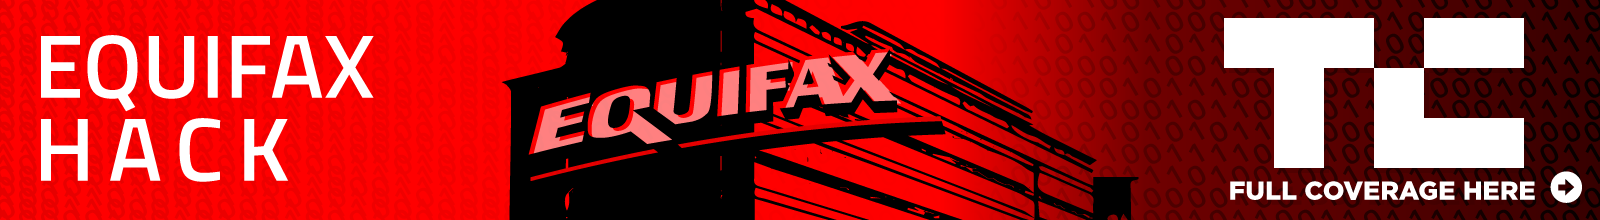 Equifax security and information executives are stepping down